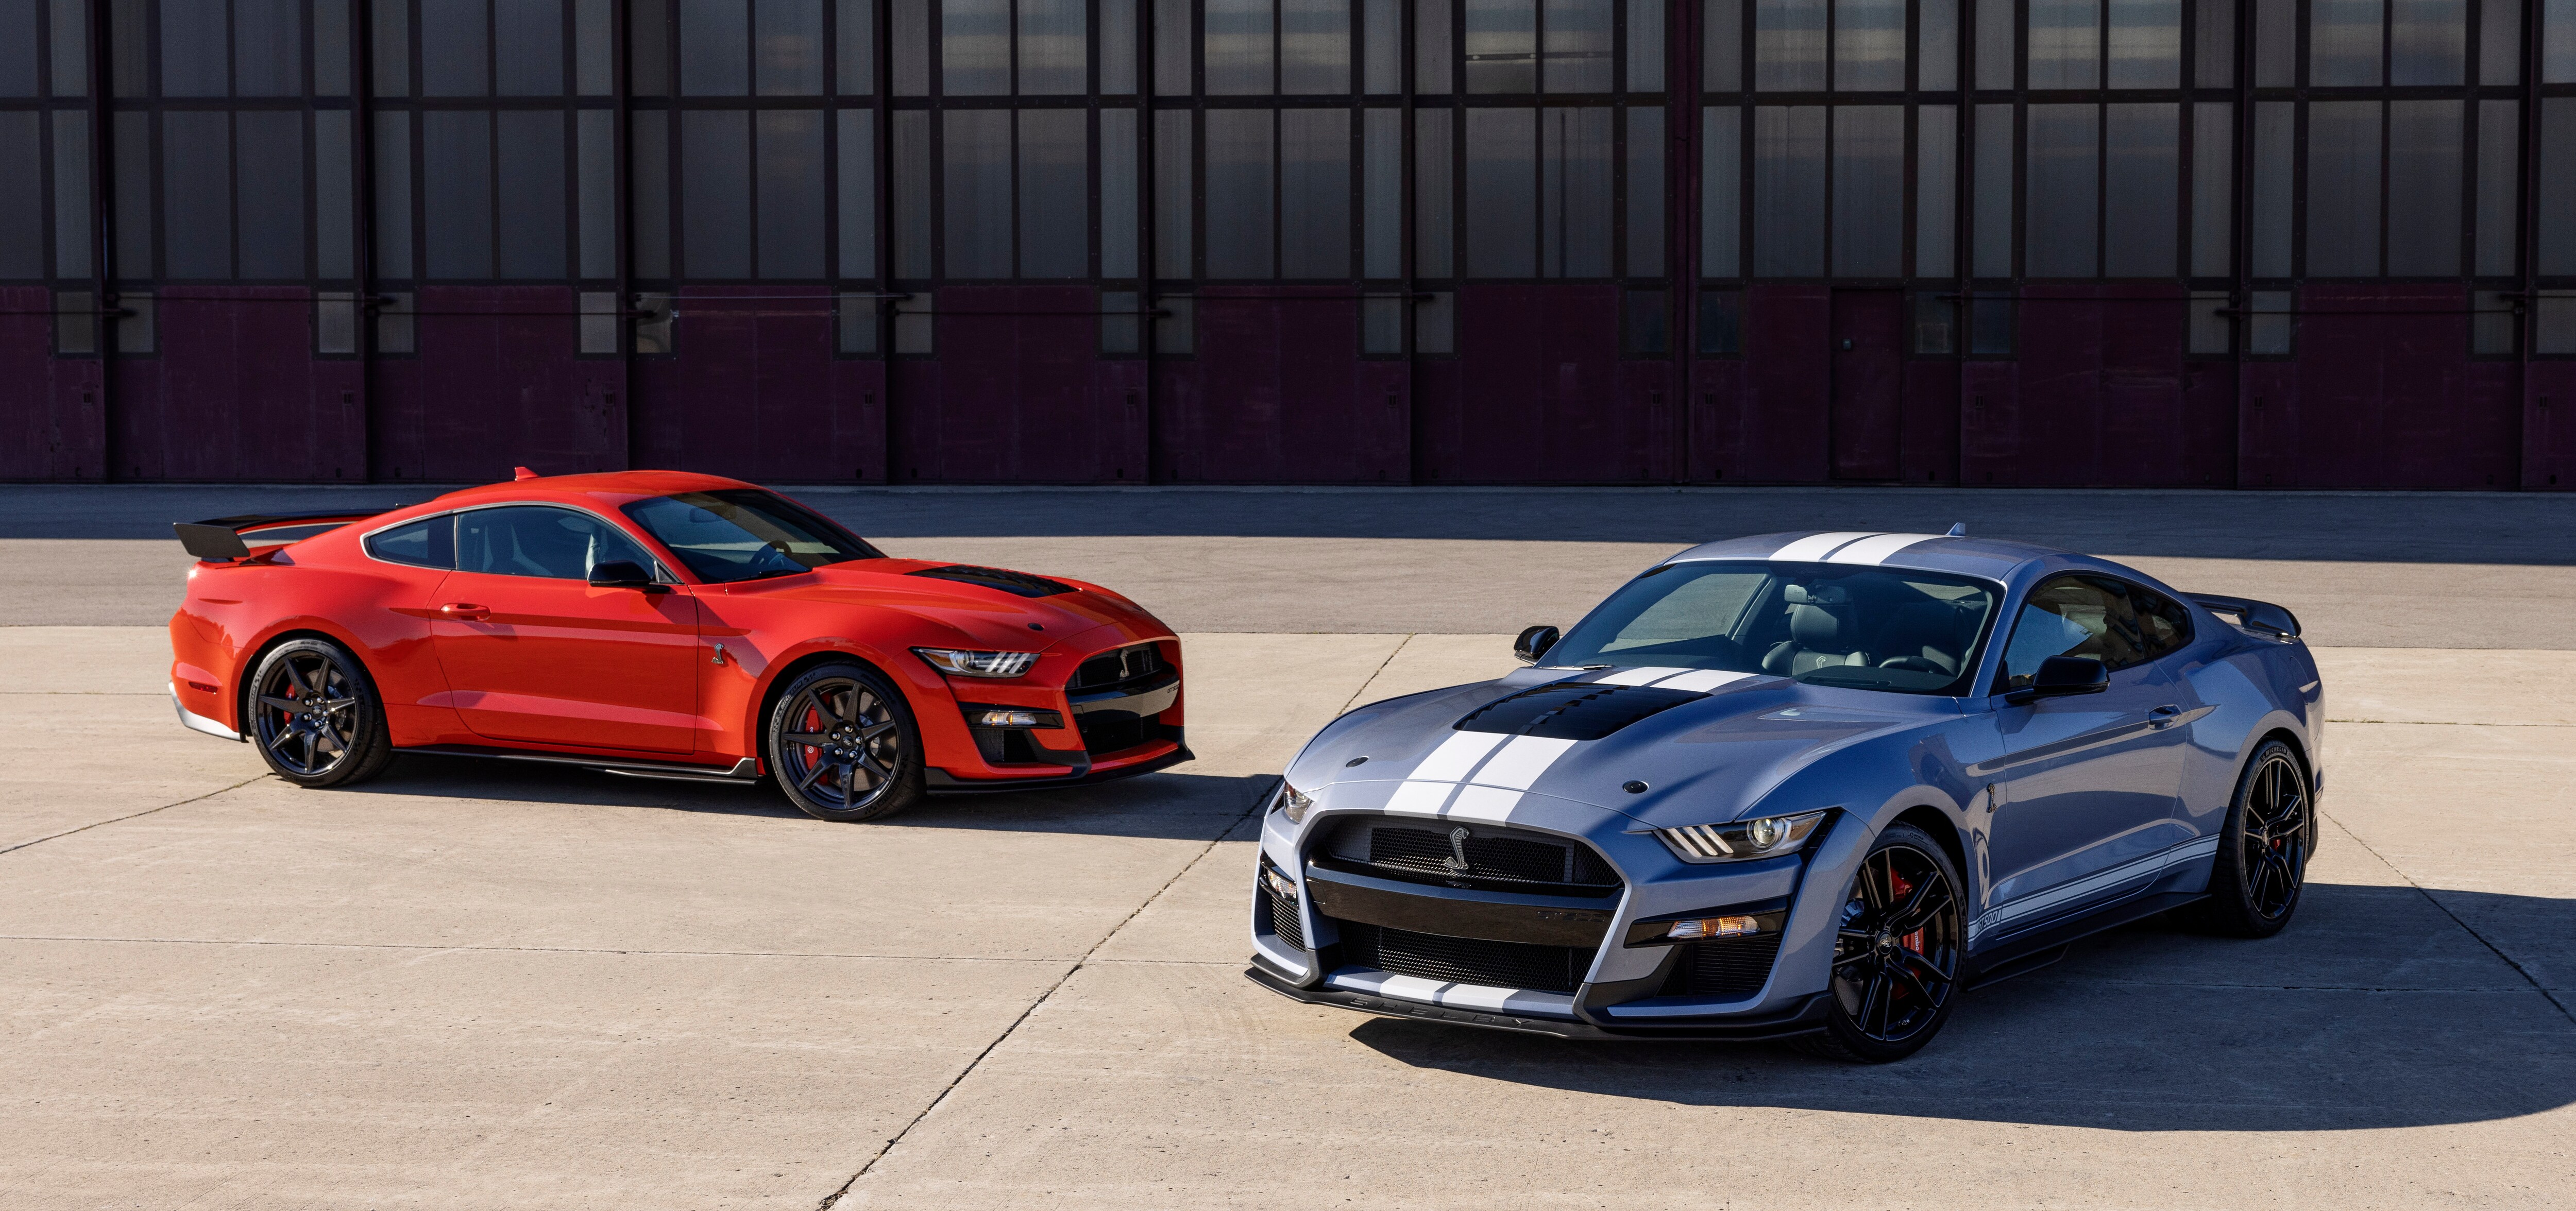 Mustang Family Grows with New Limited-Edition 2022 Mustang Shelby GT500  Heritage Edition, First-ever Mustang Coastal Edition, Plus Ford  Performance-Exclusive Code Orange Paint | Ford Media Center